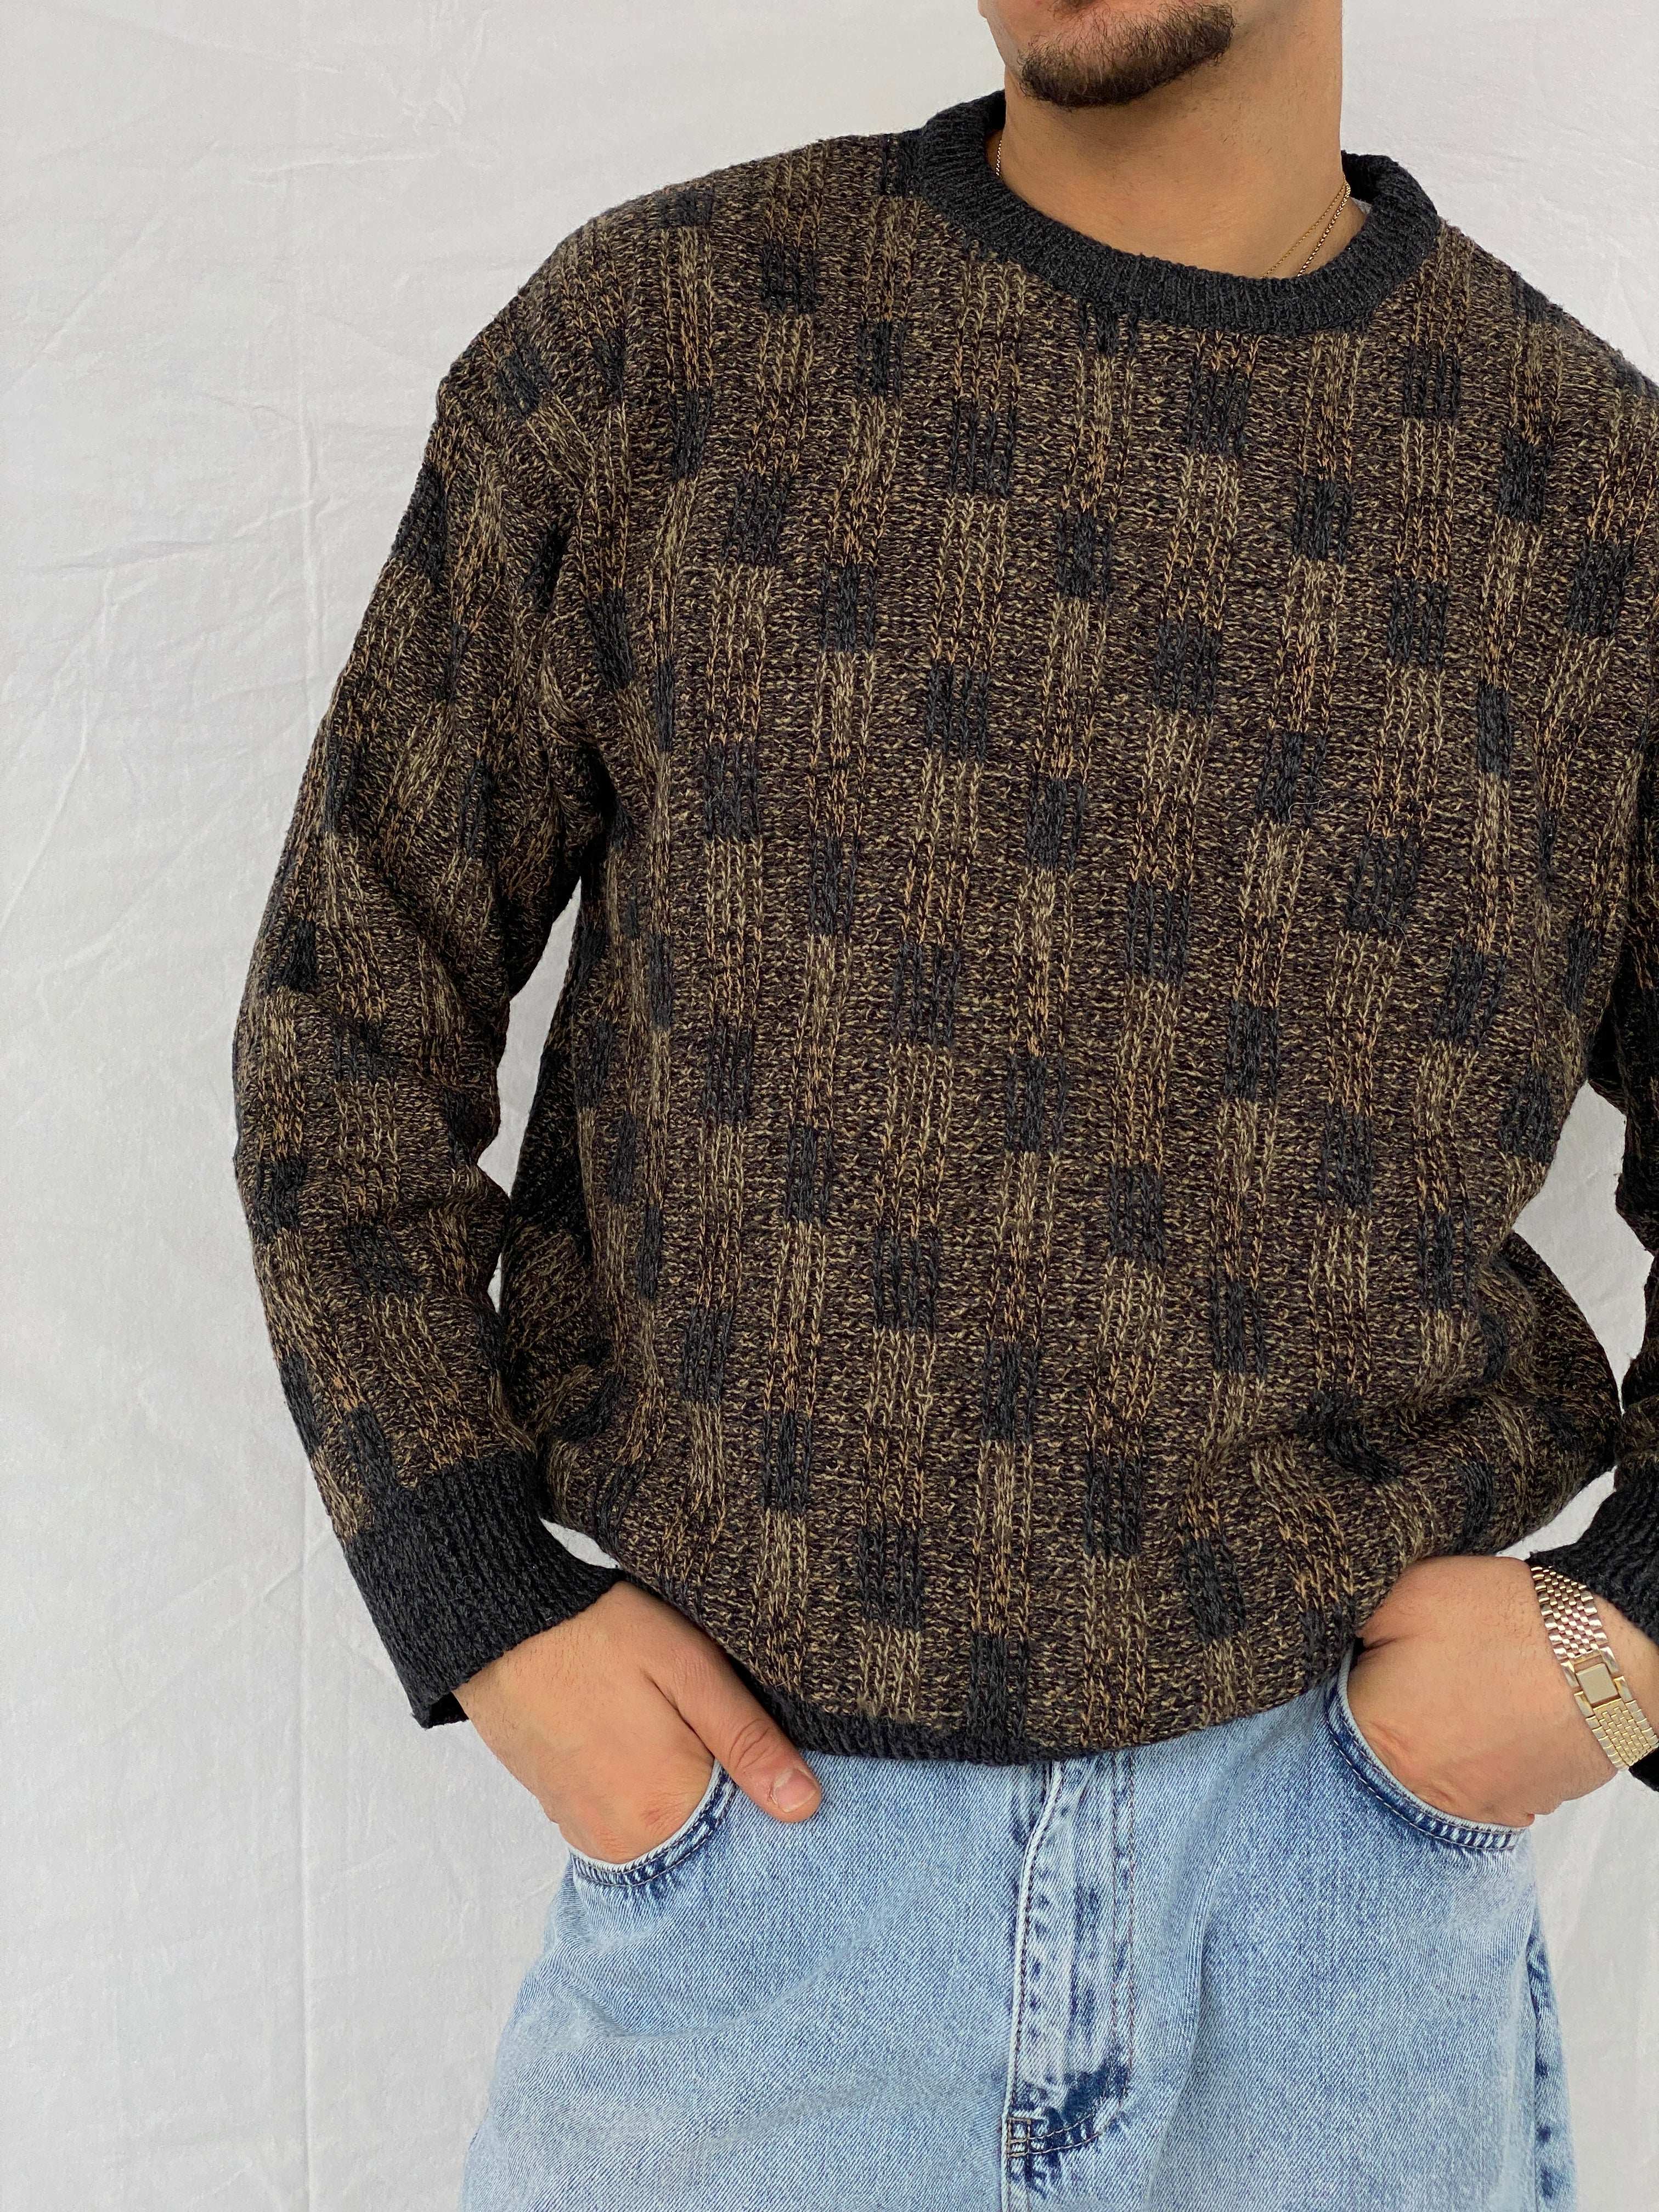 Vintage Town Craft Knitted Sweater - Size Medium - Balagan Vintage Sweater 90s, Abdullah, knitted sweater, winter